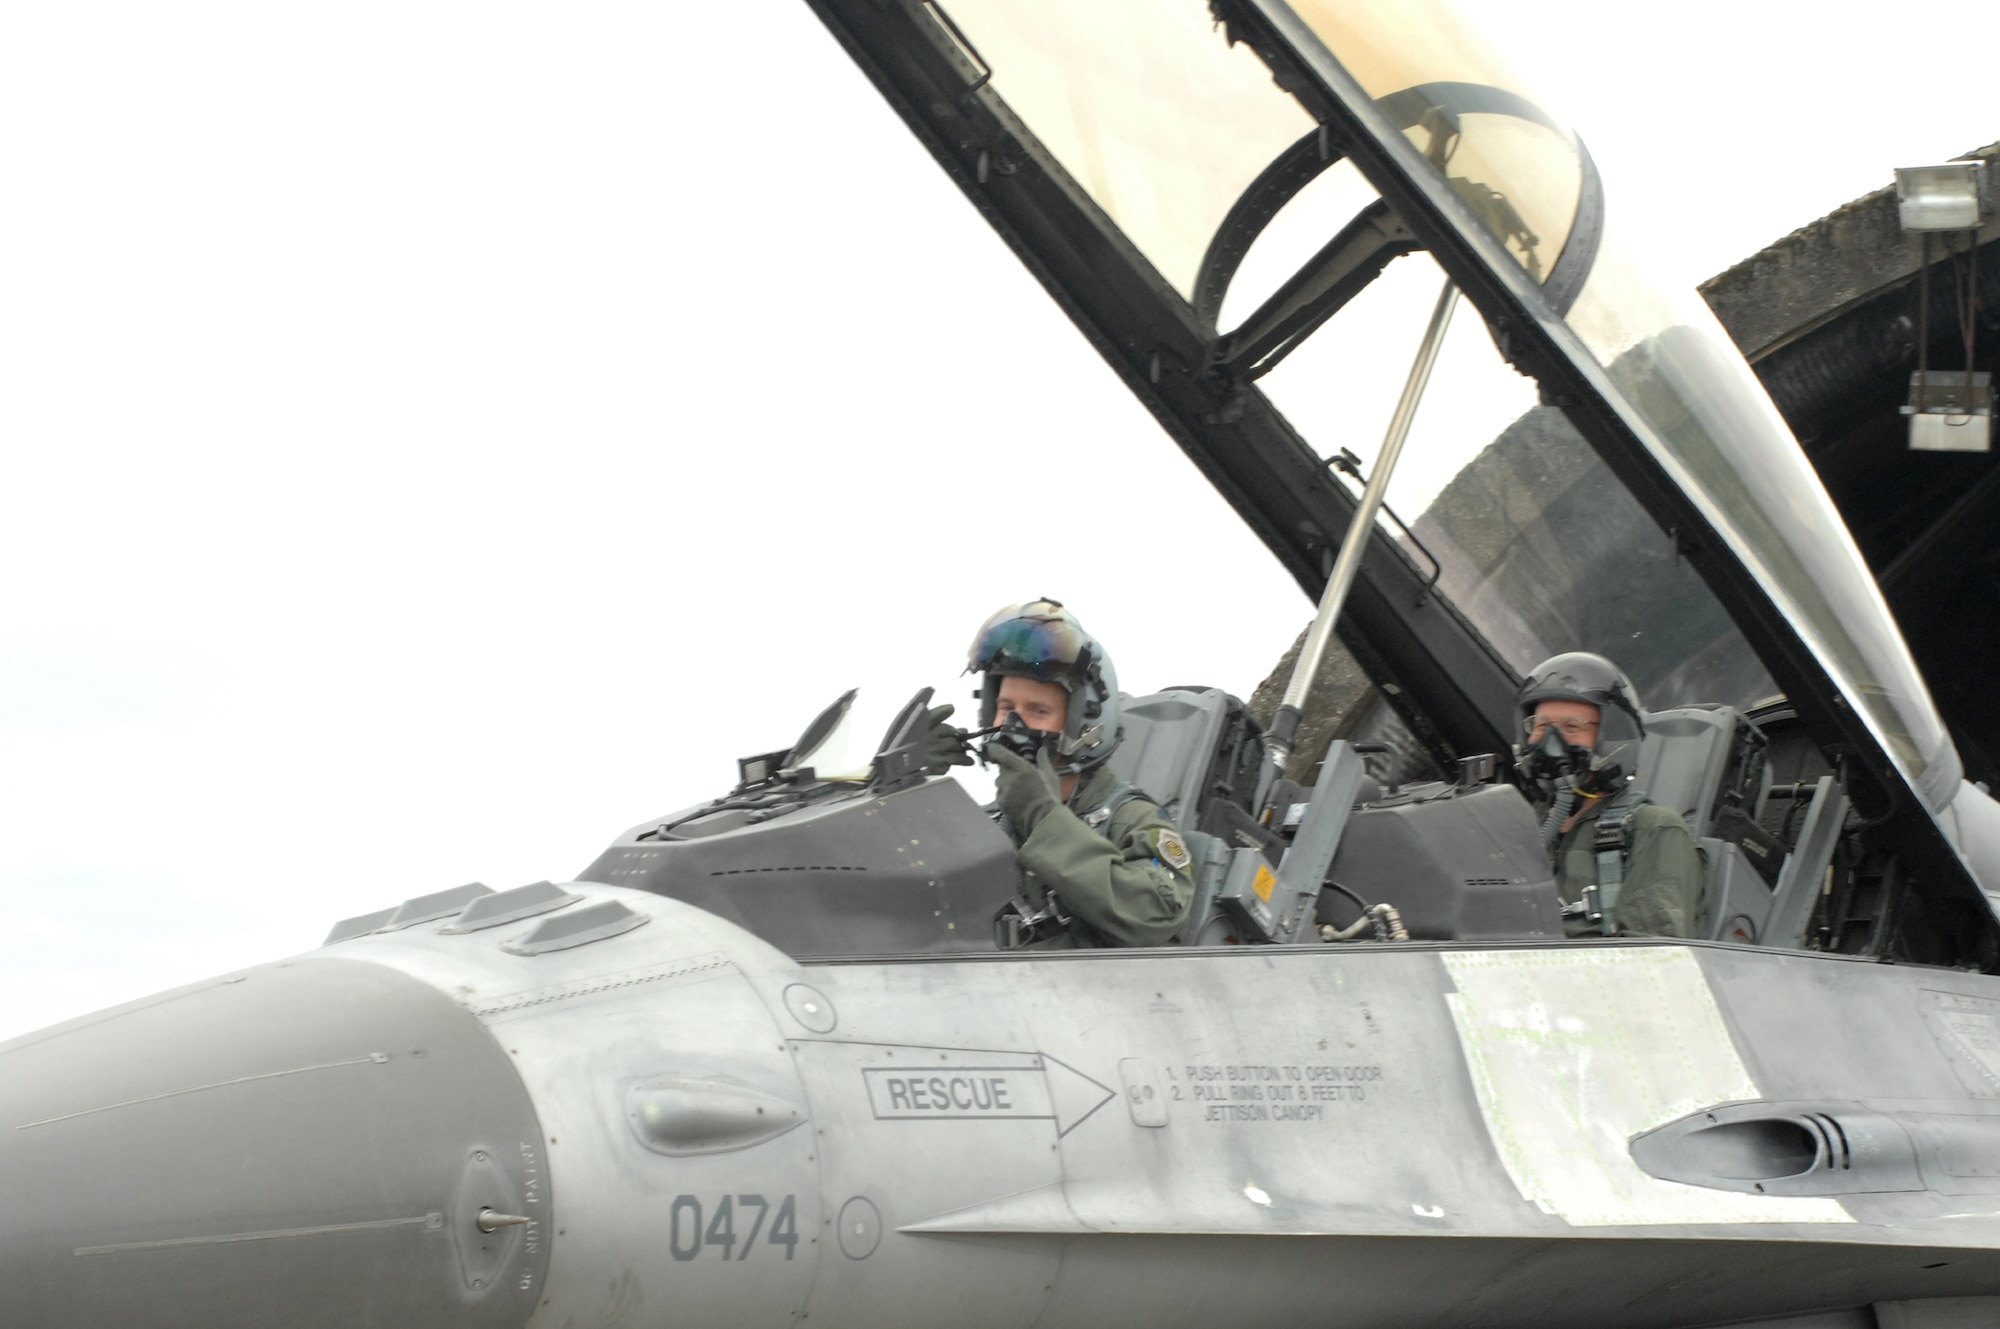 SPANGDAHLEM AIR BASE, Germany -- Lt. Col. Doug “Stoli” Nikolai, 22nd Fighter Squadron commander, and Chief Master Sgt. Vance Clarke, 52nd Fight Wing command chief, prepare for flight in an F-16 Viper. The incentive flight was part of a program to help senior leaders gain a better understanding of the base operations. (U.S. Air Force photo/Senior Airman Logan Tuttle)  